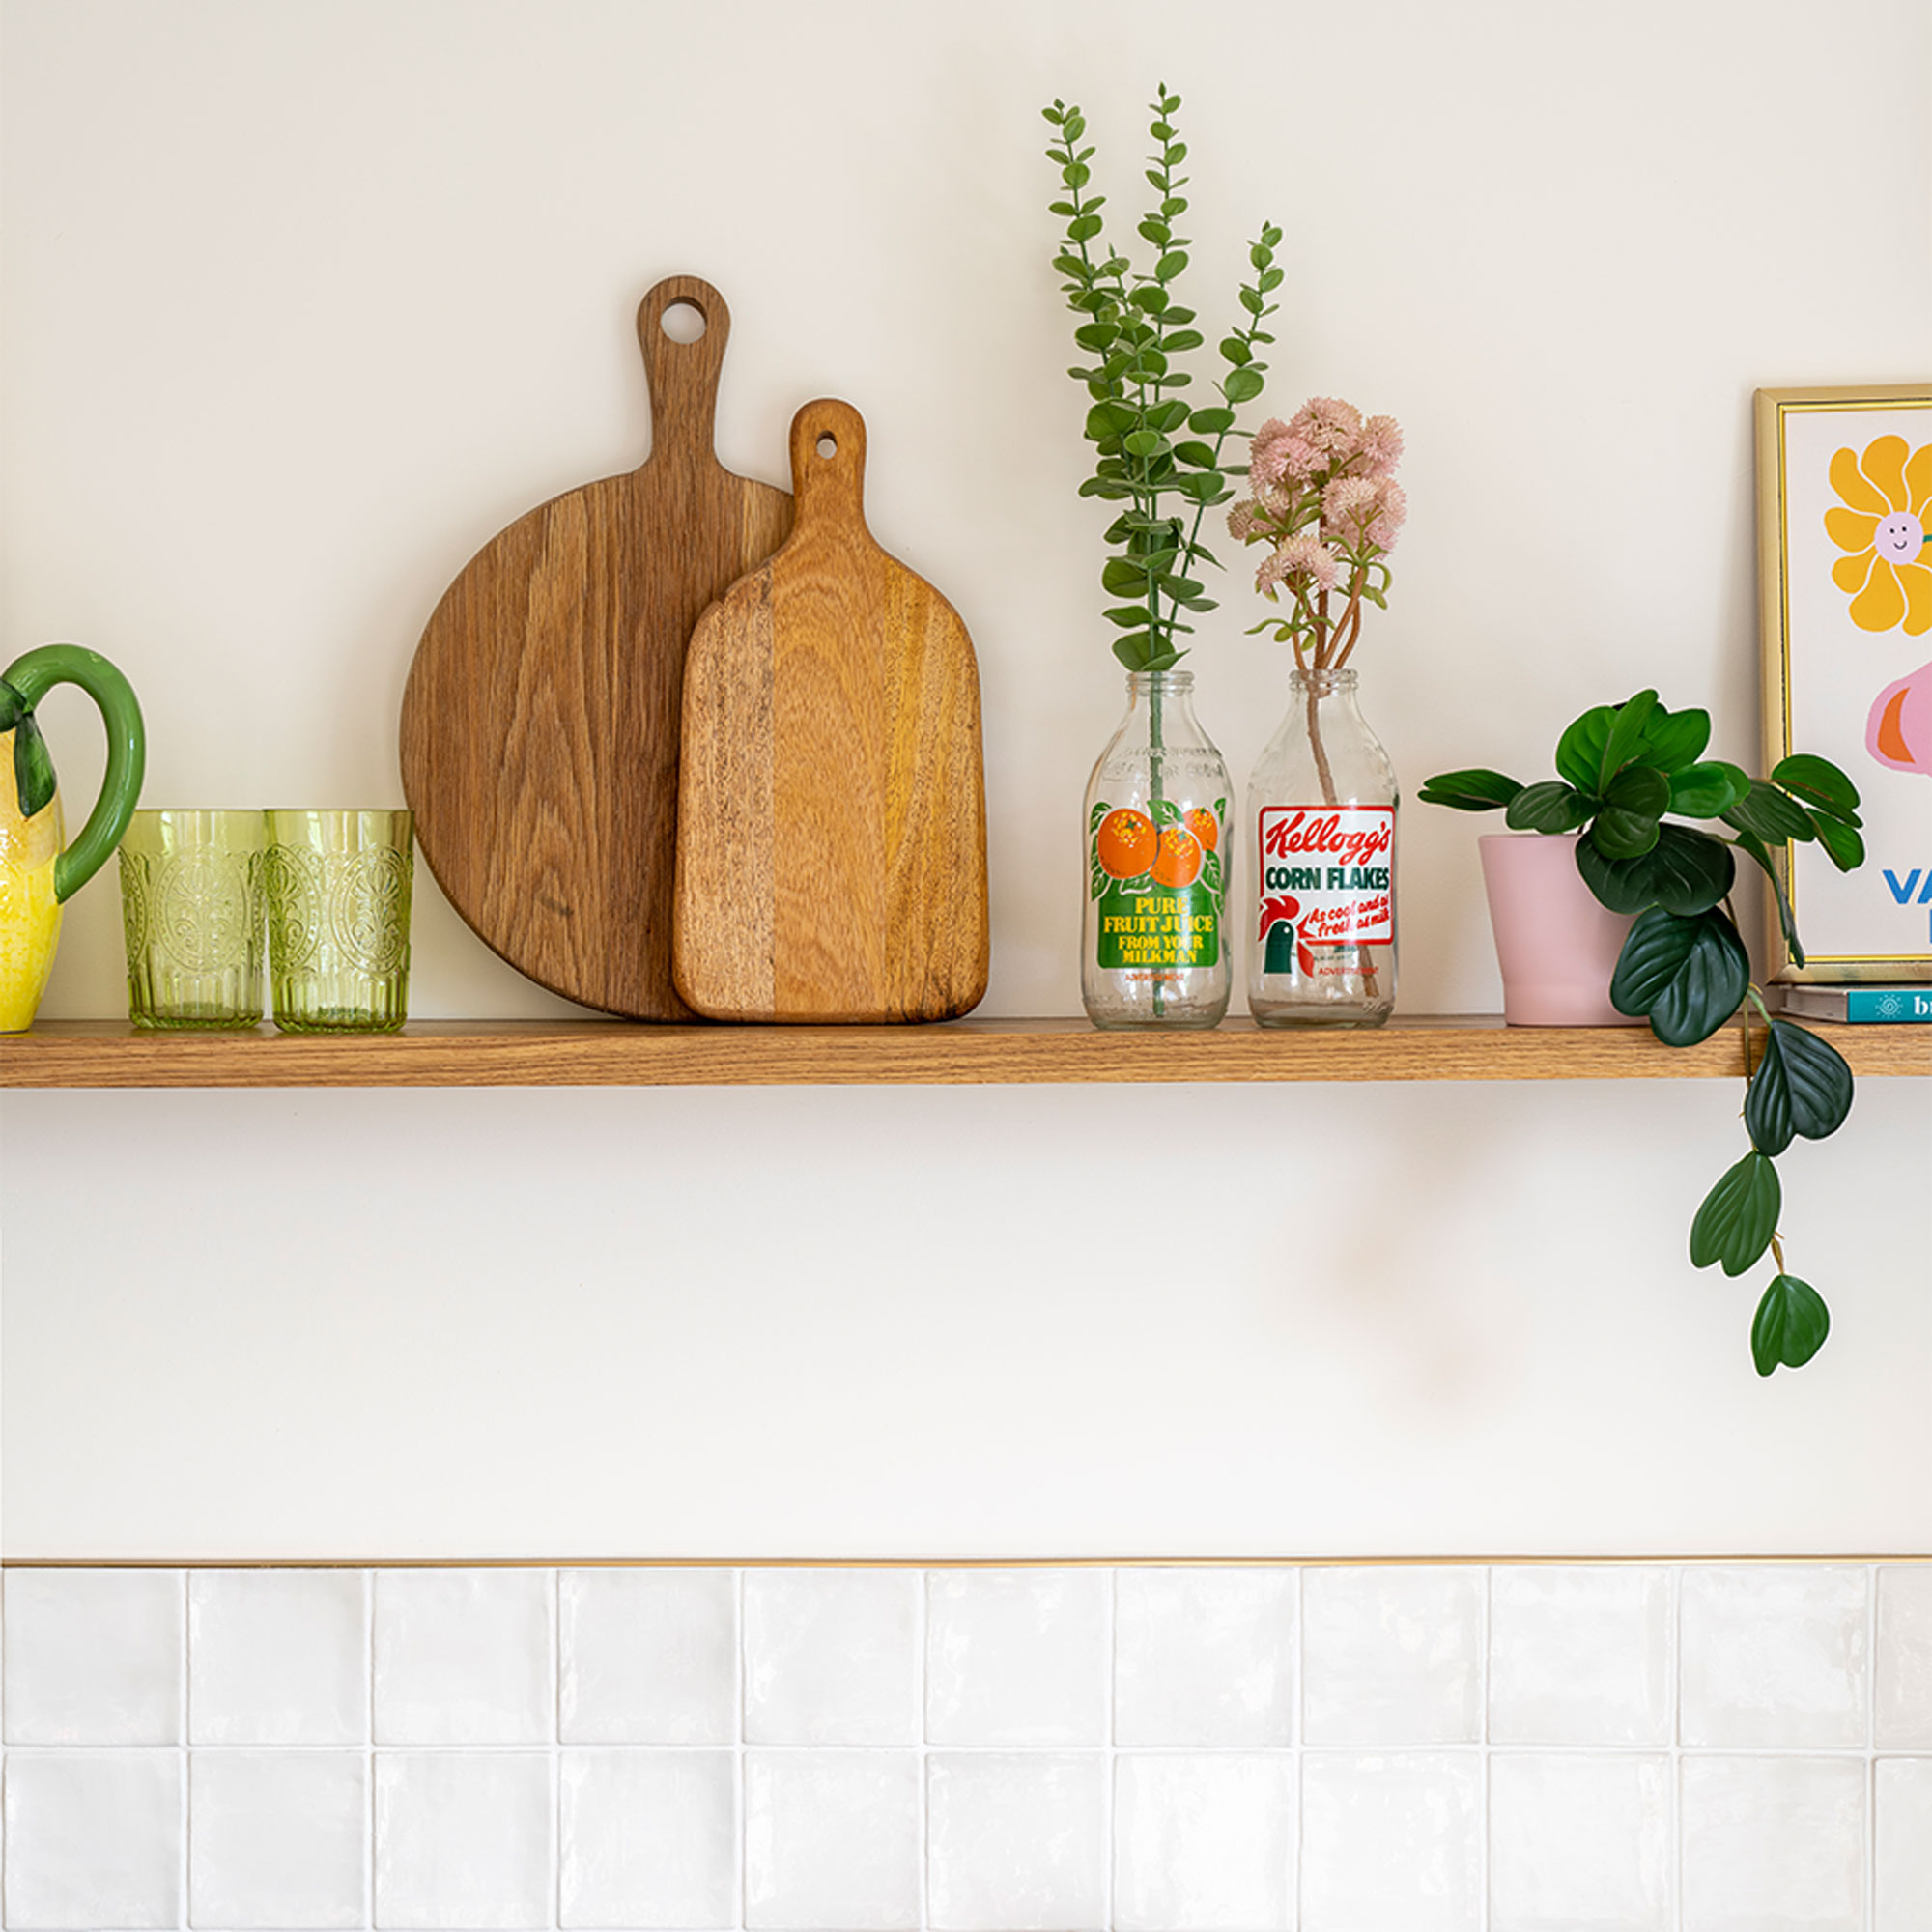 Green kitchen with white tiles and wooden shelf